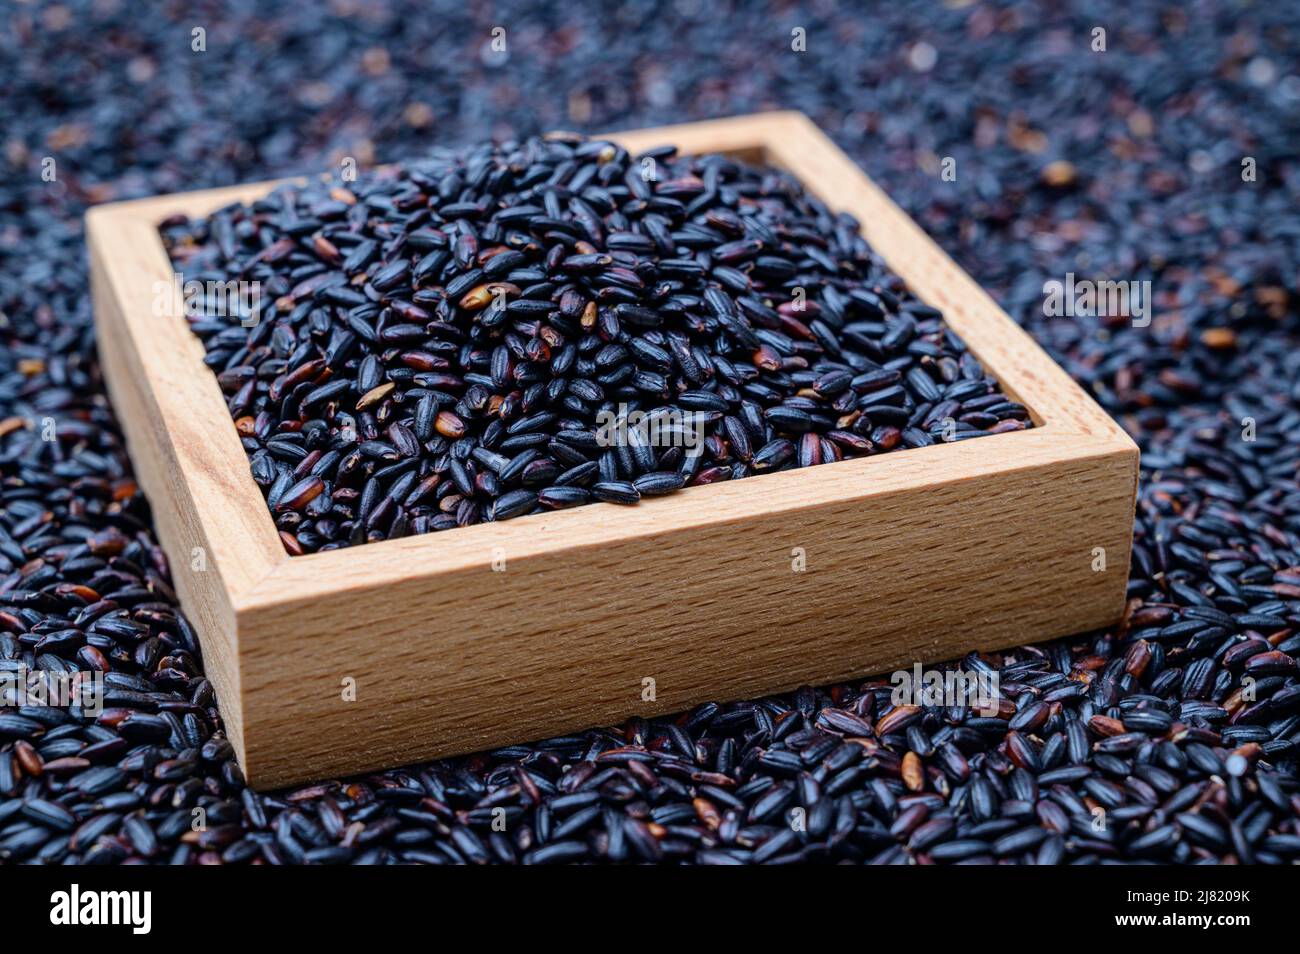 A background with black rice stacked and a wooden bowl containing black rice. Stock Photo